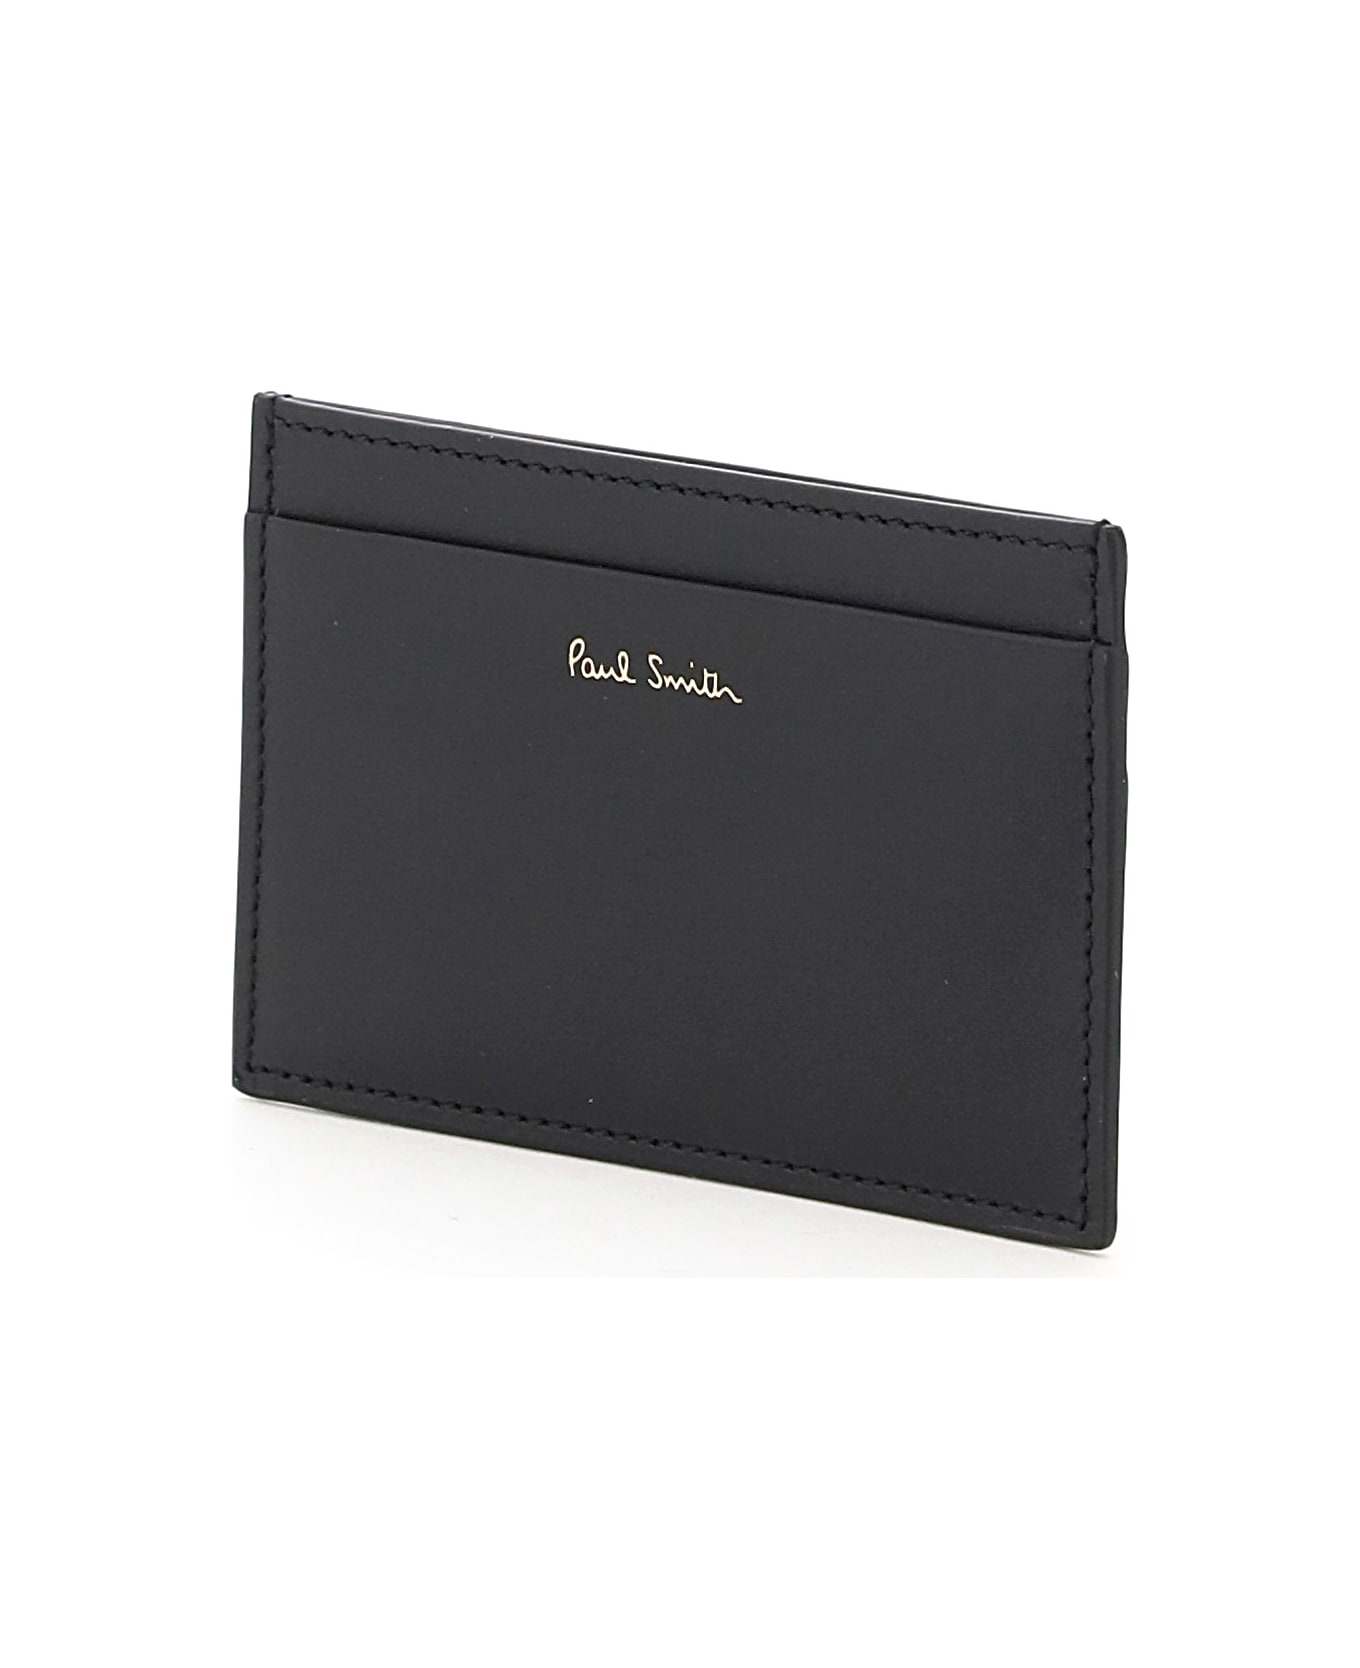 Paul Smith Striped Card Holder - BLACK/RED